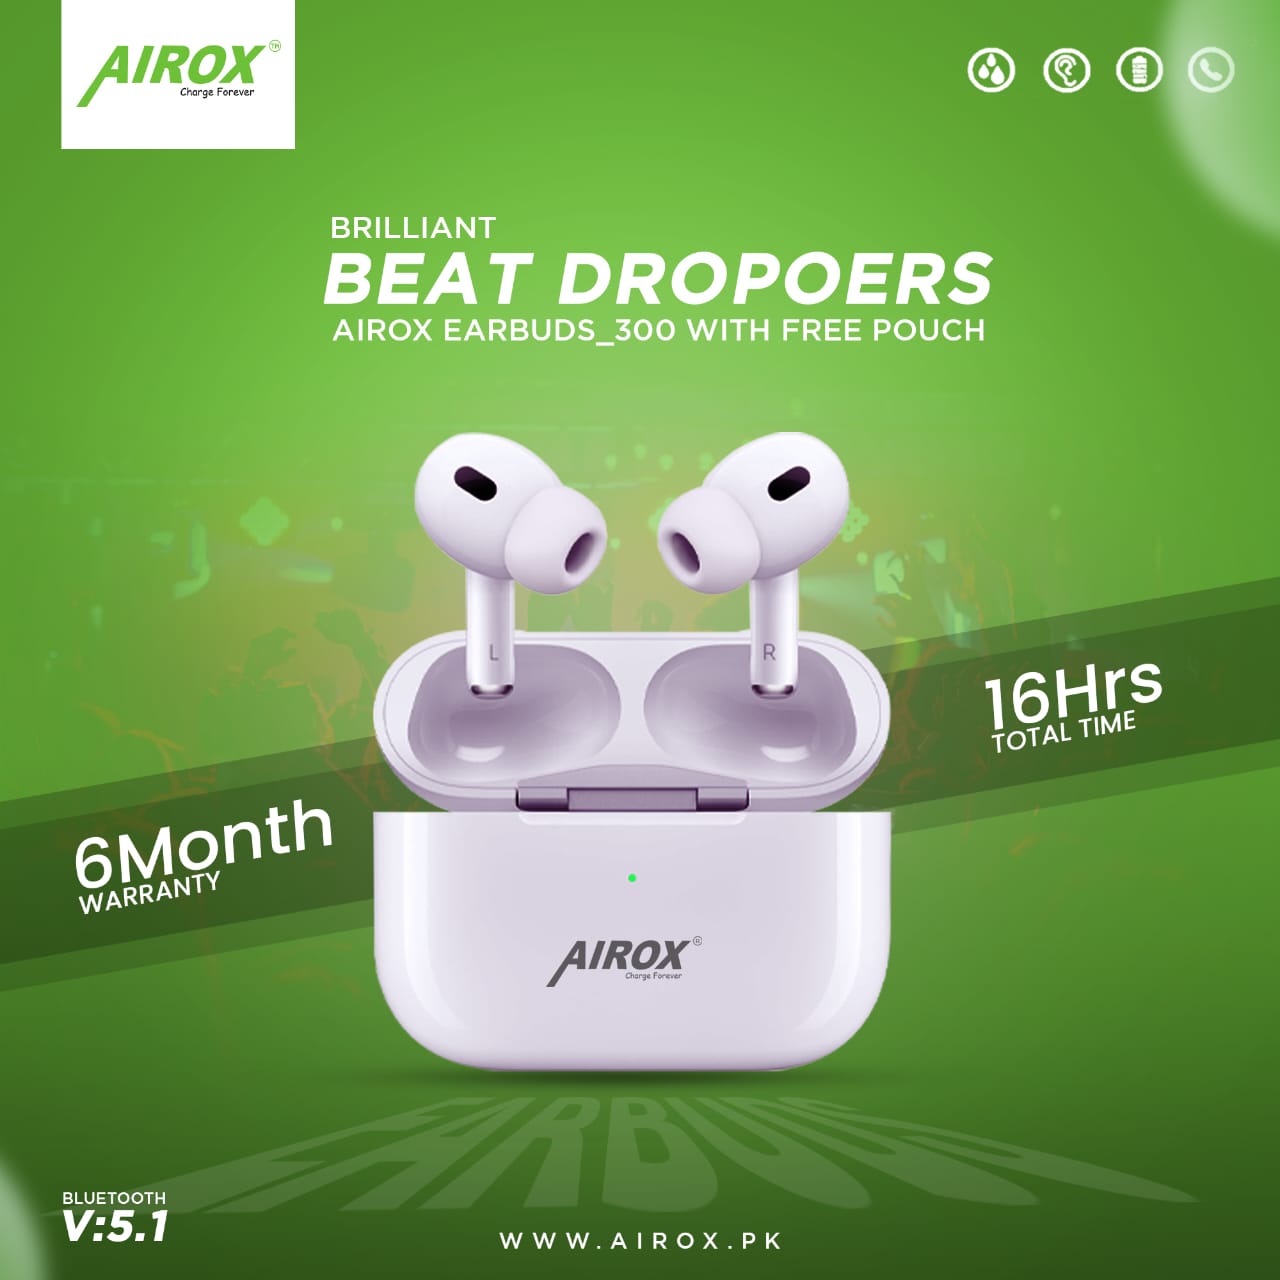 Airpods pro price in Pakistan